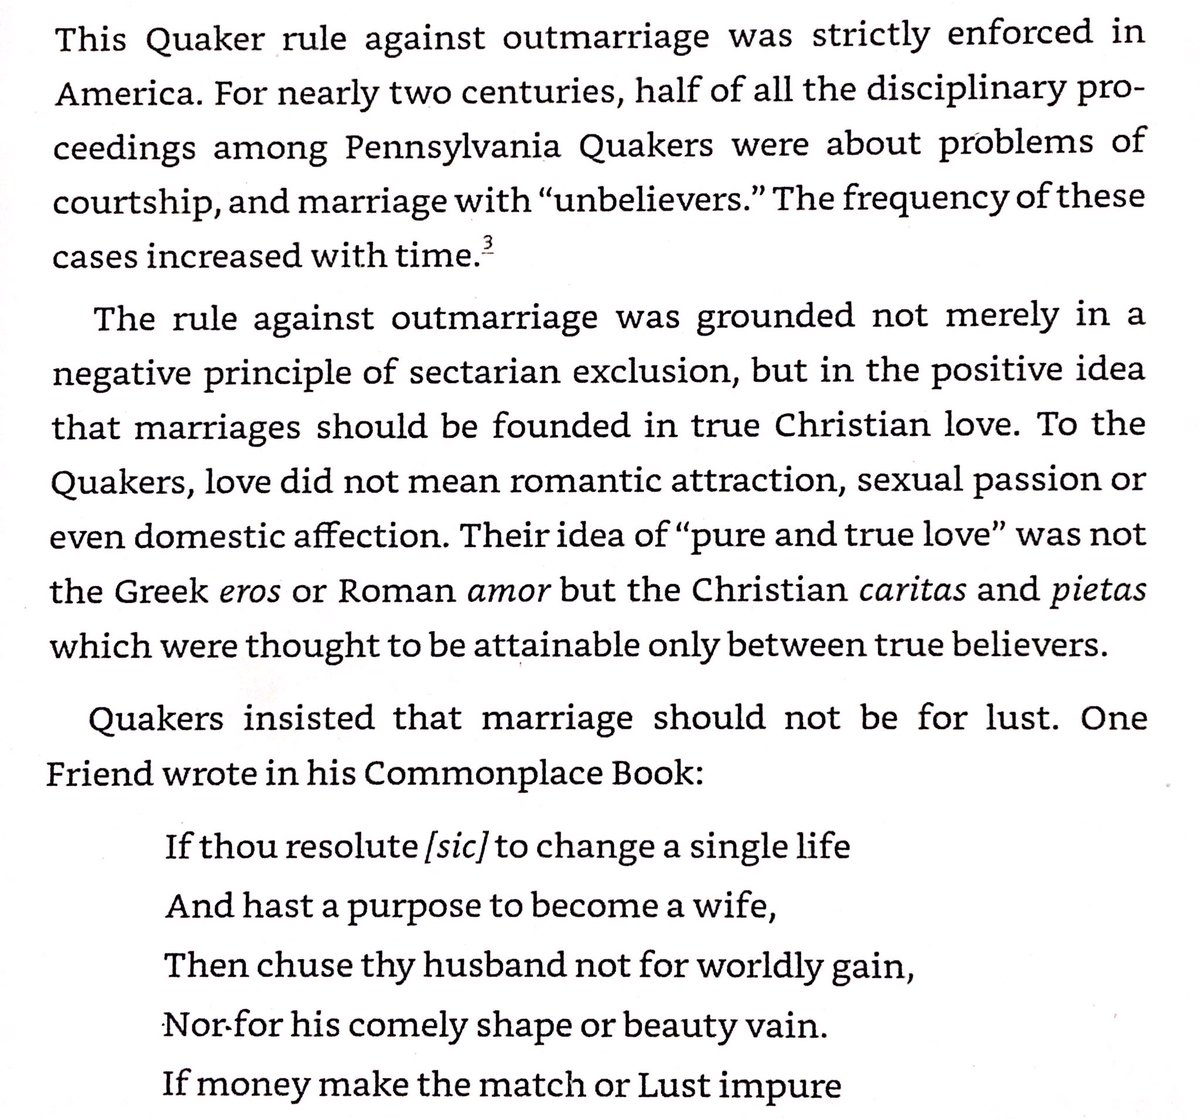 Quaker restrictions on marrying non-Quakers & complex marriage requirements led to higher age of marriage & lower marriage rates than their Anglican & Puritan neighbors. Main reason for their decline in population share - fewer kids.